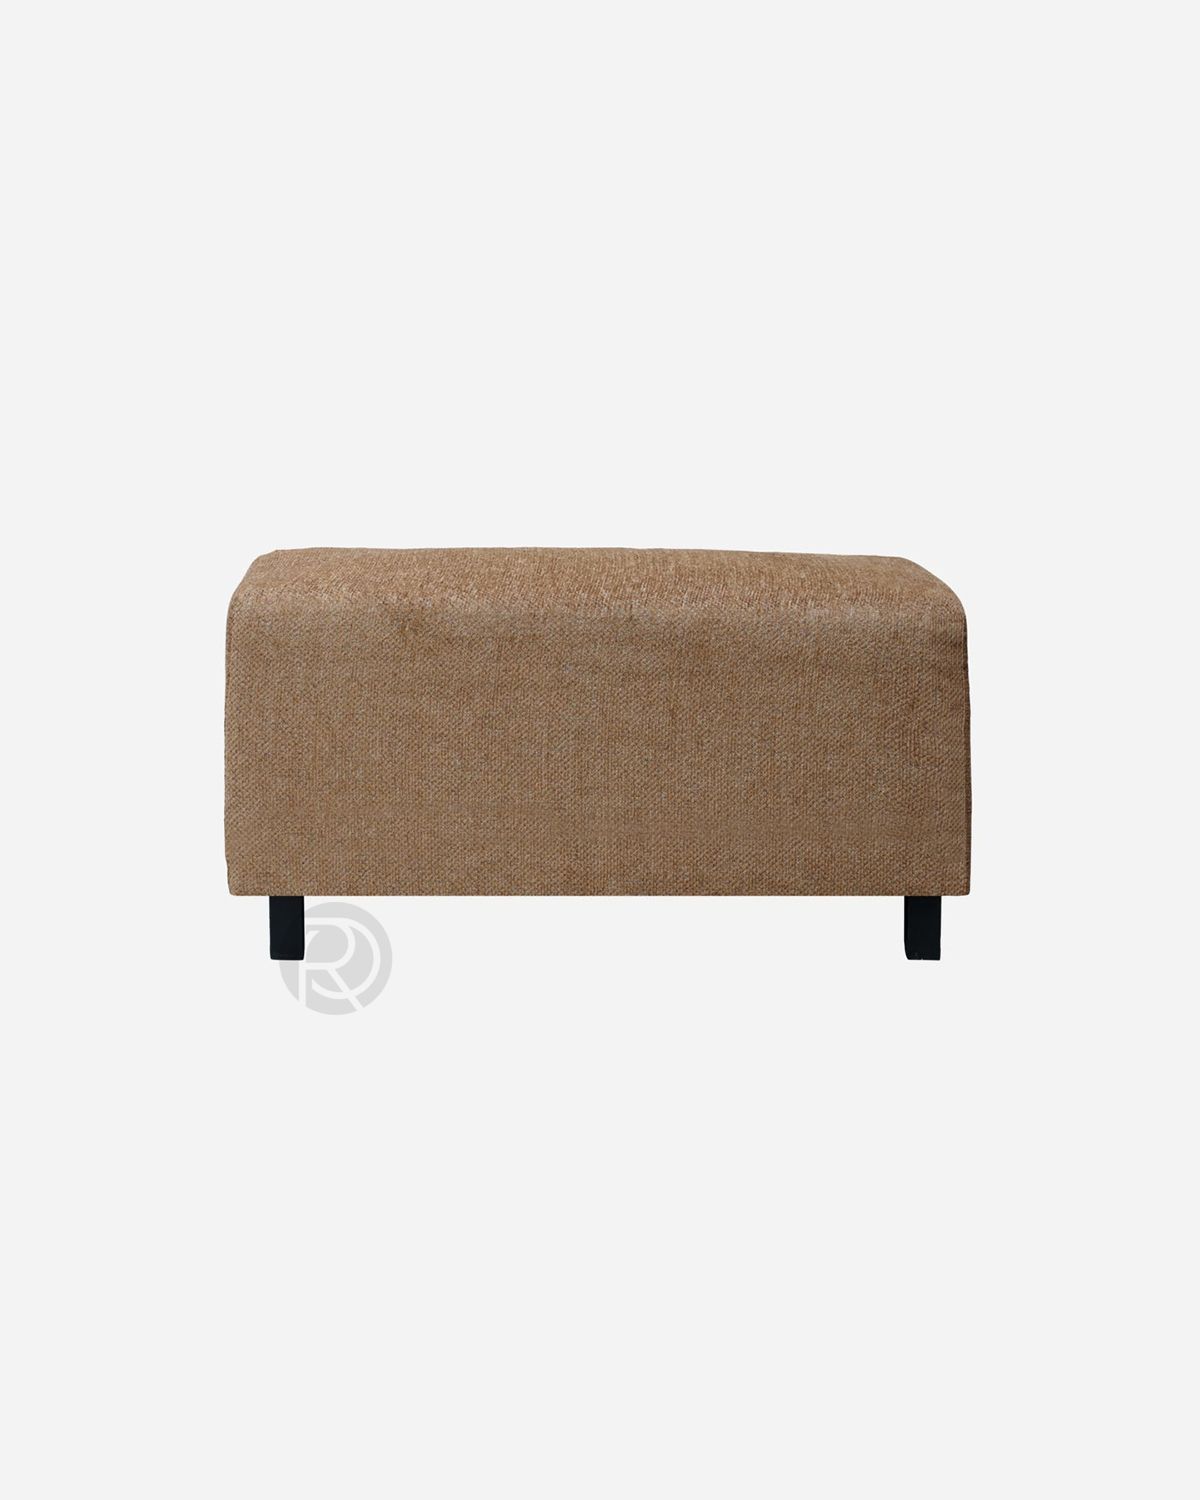 Pouf CAMPHOR MINI by House Doctor